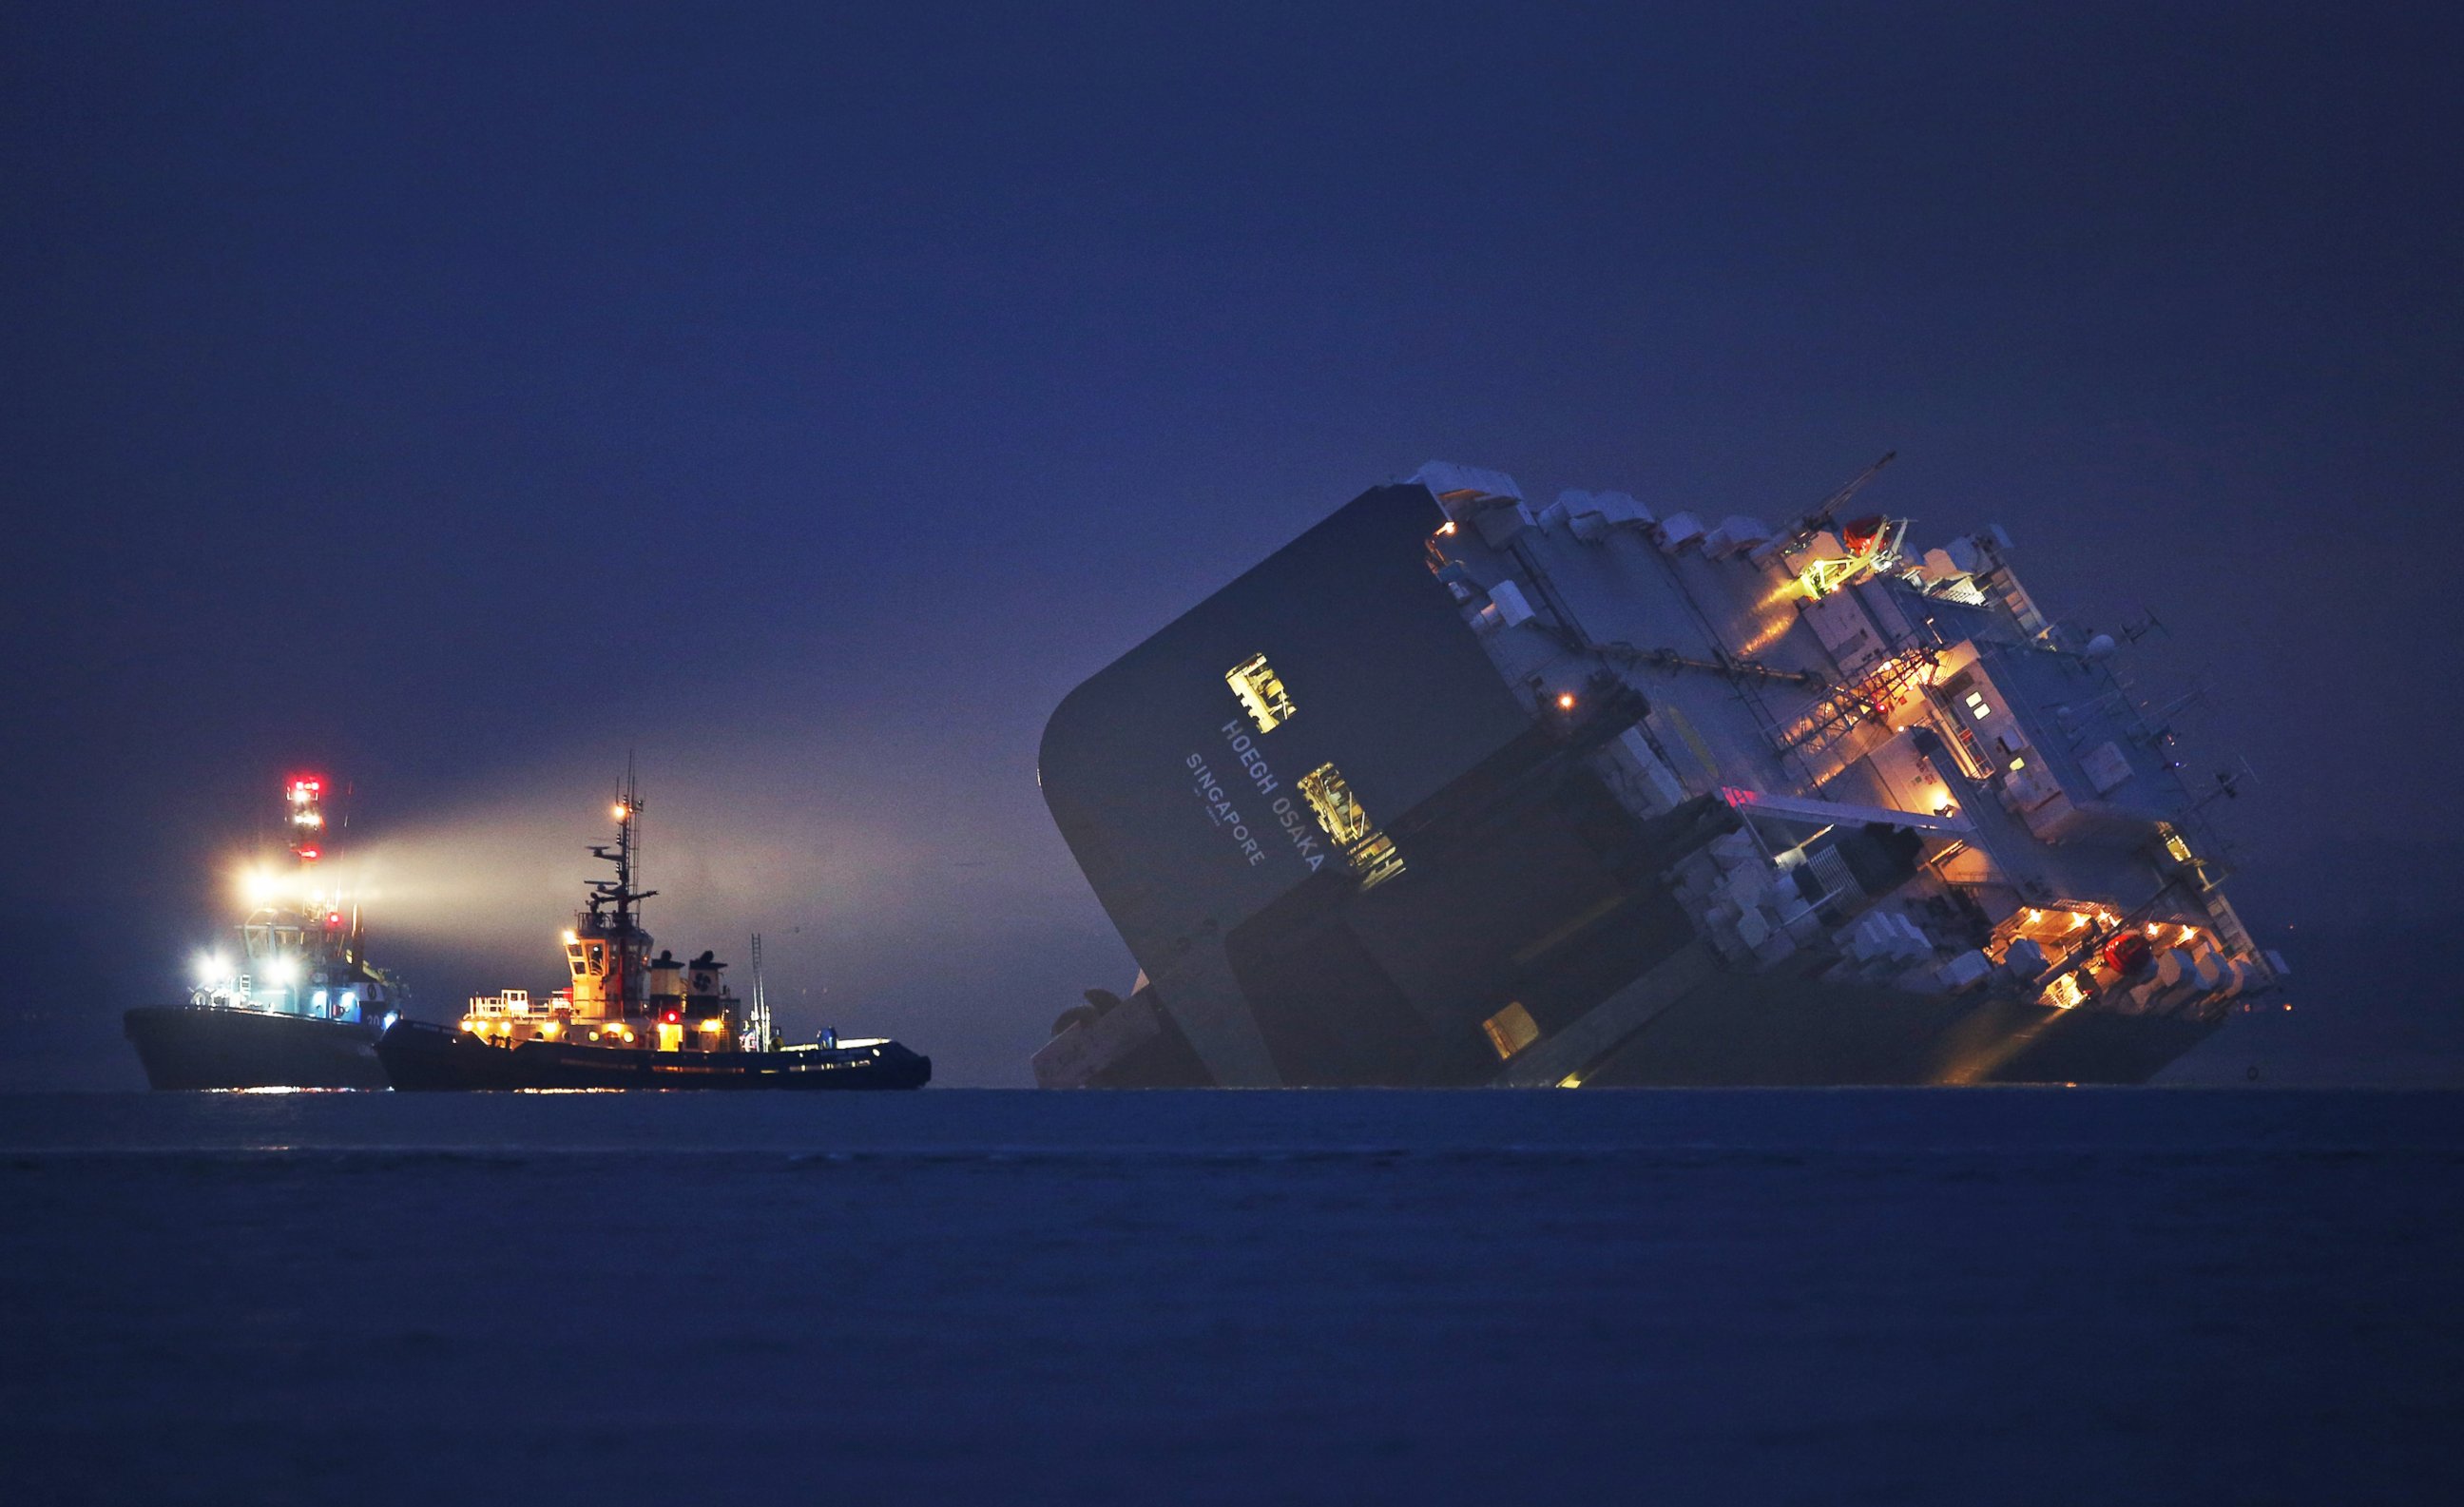 PHOTO:  A salvage tug lights the hull of the Hoegh Osaka cargo ship after it ran aground